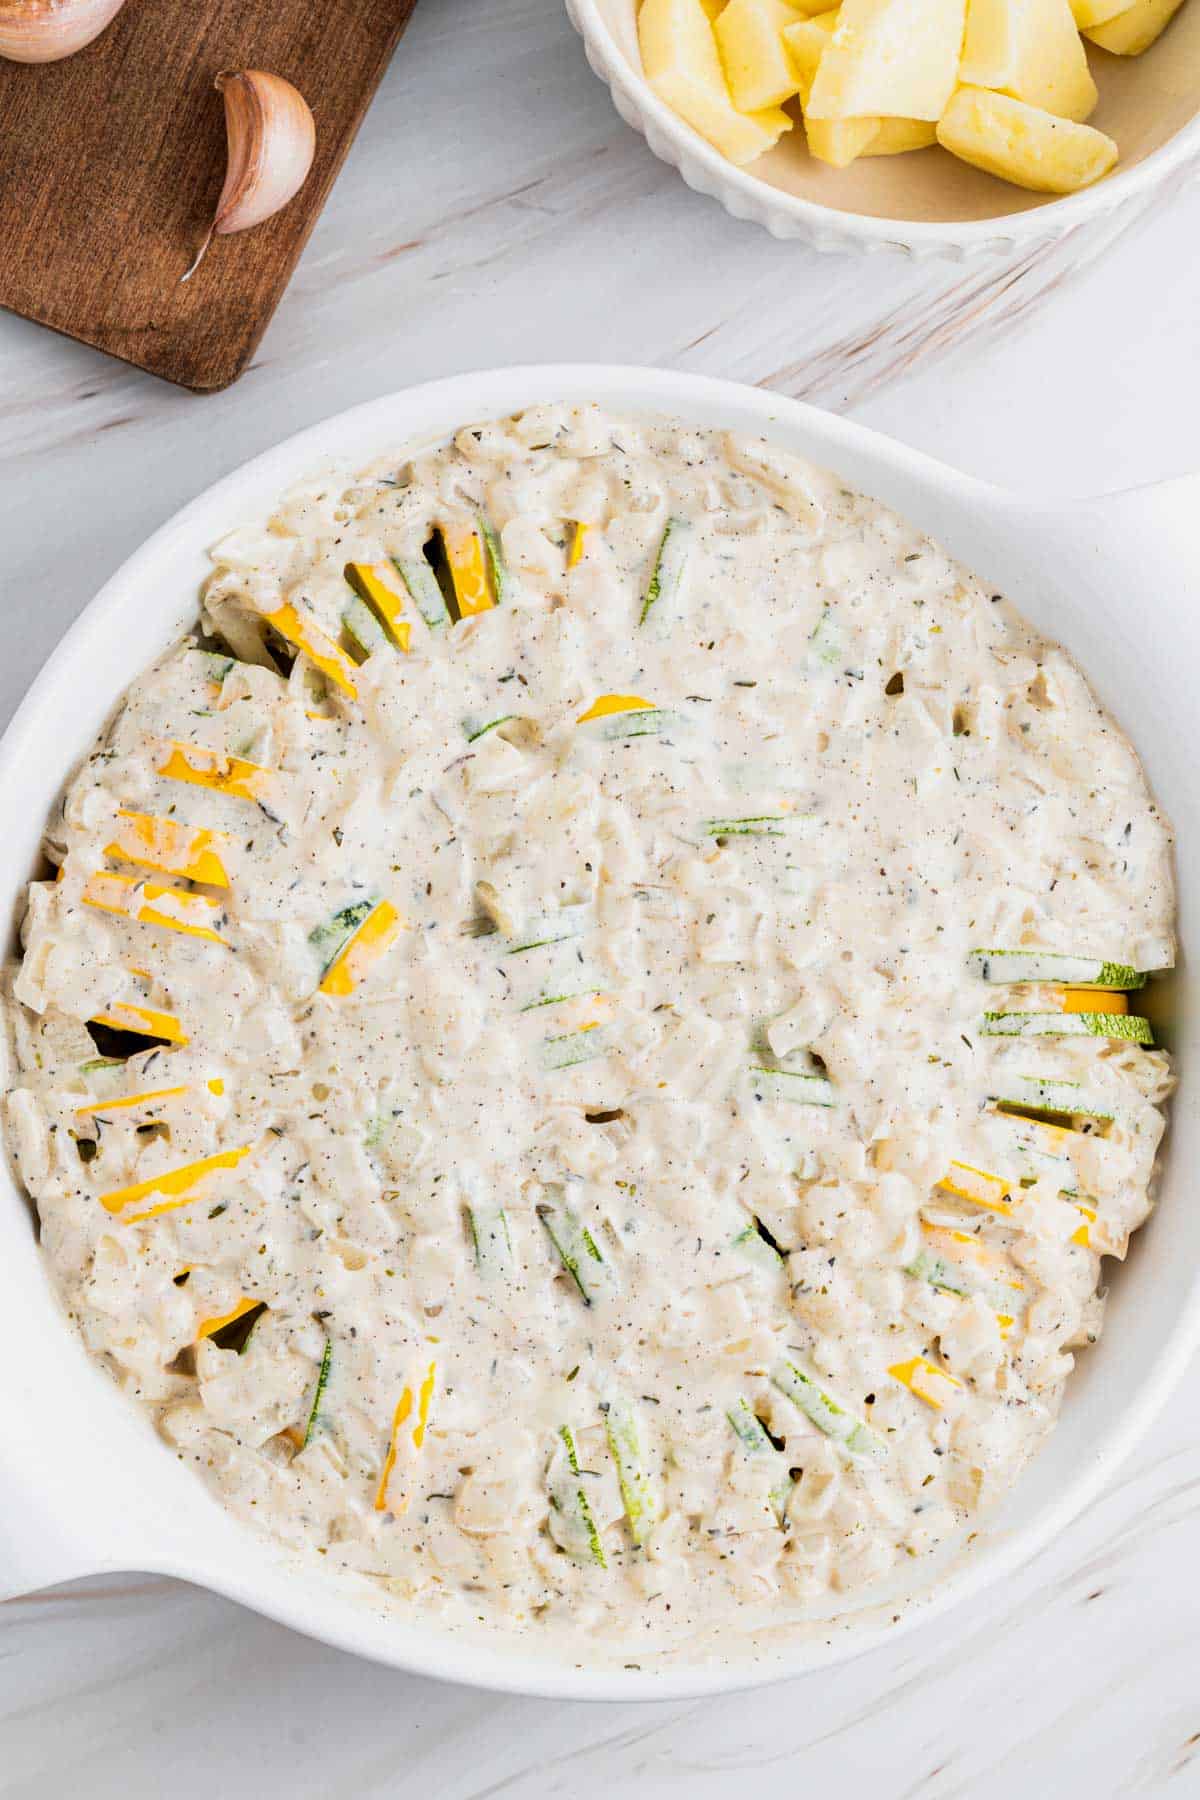 zucchini bake topped with white sauce.